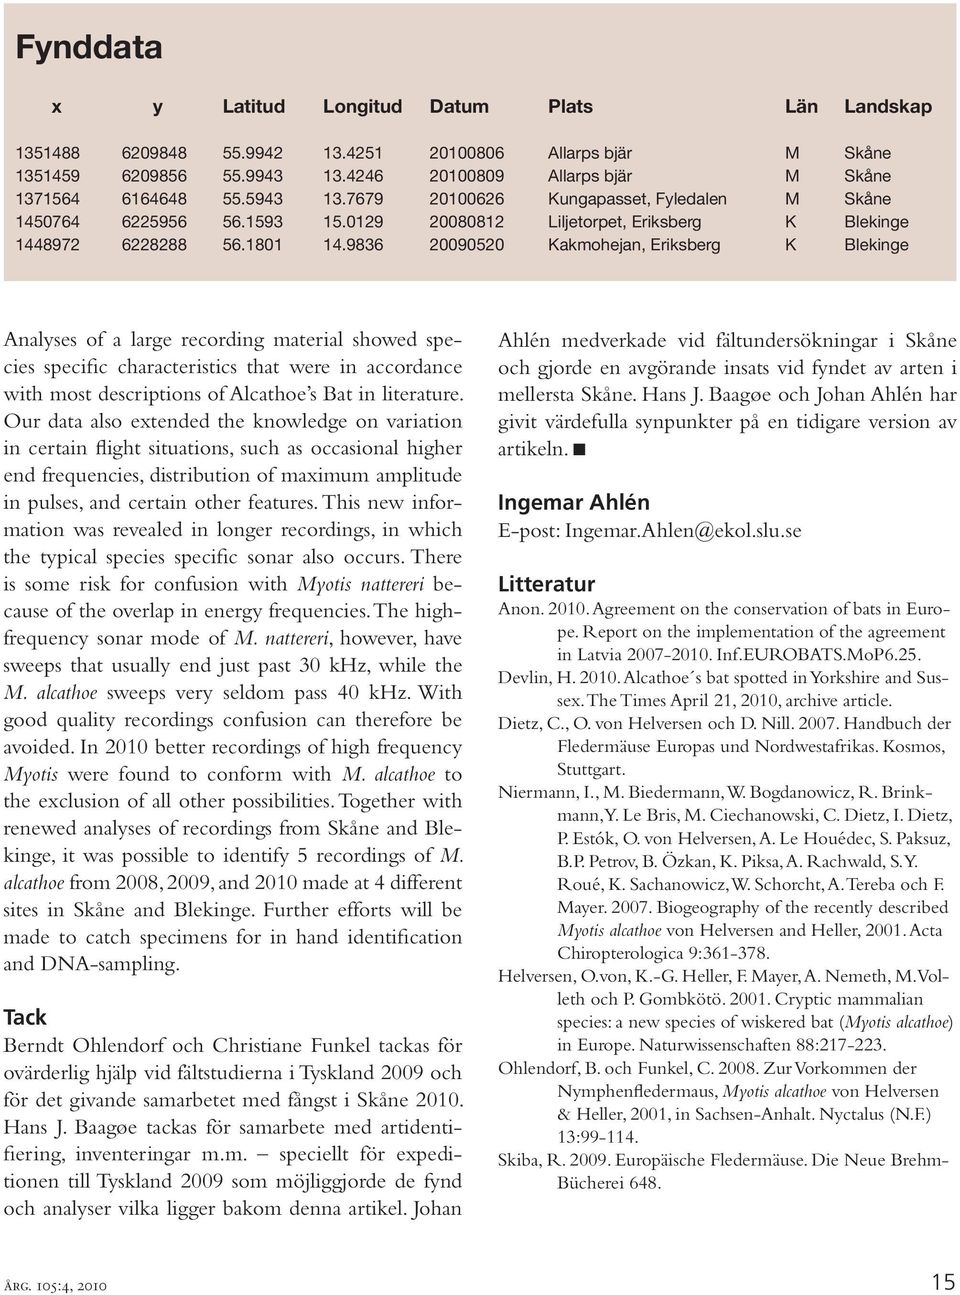 9836 20090520 Kakmohejan, Eriksberg K Blekinge Analyses of a large recording material showed species specific characteristics that were in accordance with most descriptions of Alcathoe s Bat in